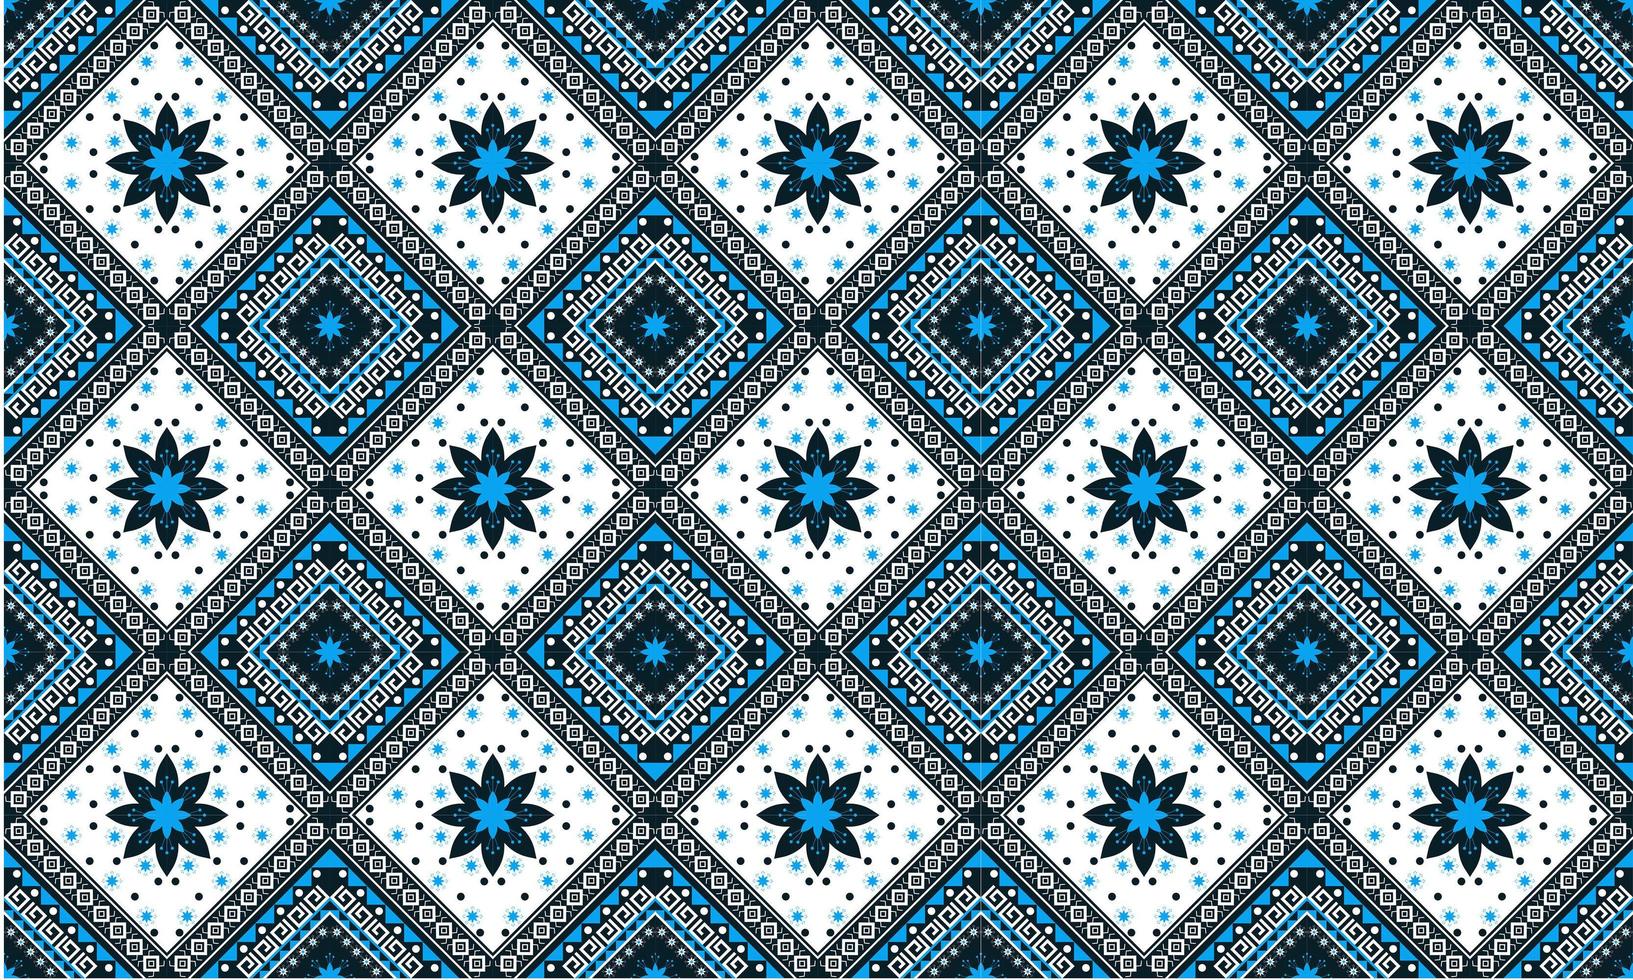 Geometric ethnic oriental seamless pattern traditional Design for background,carpet,wallpaper,clothing,wrapping,Batik,fabric,Vector illustration.embroidery style. vector